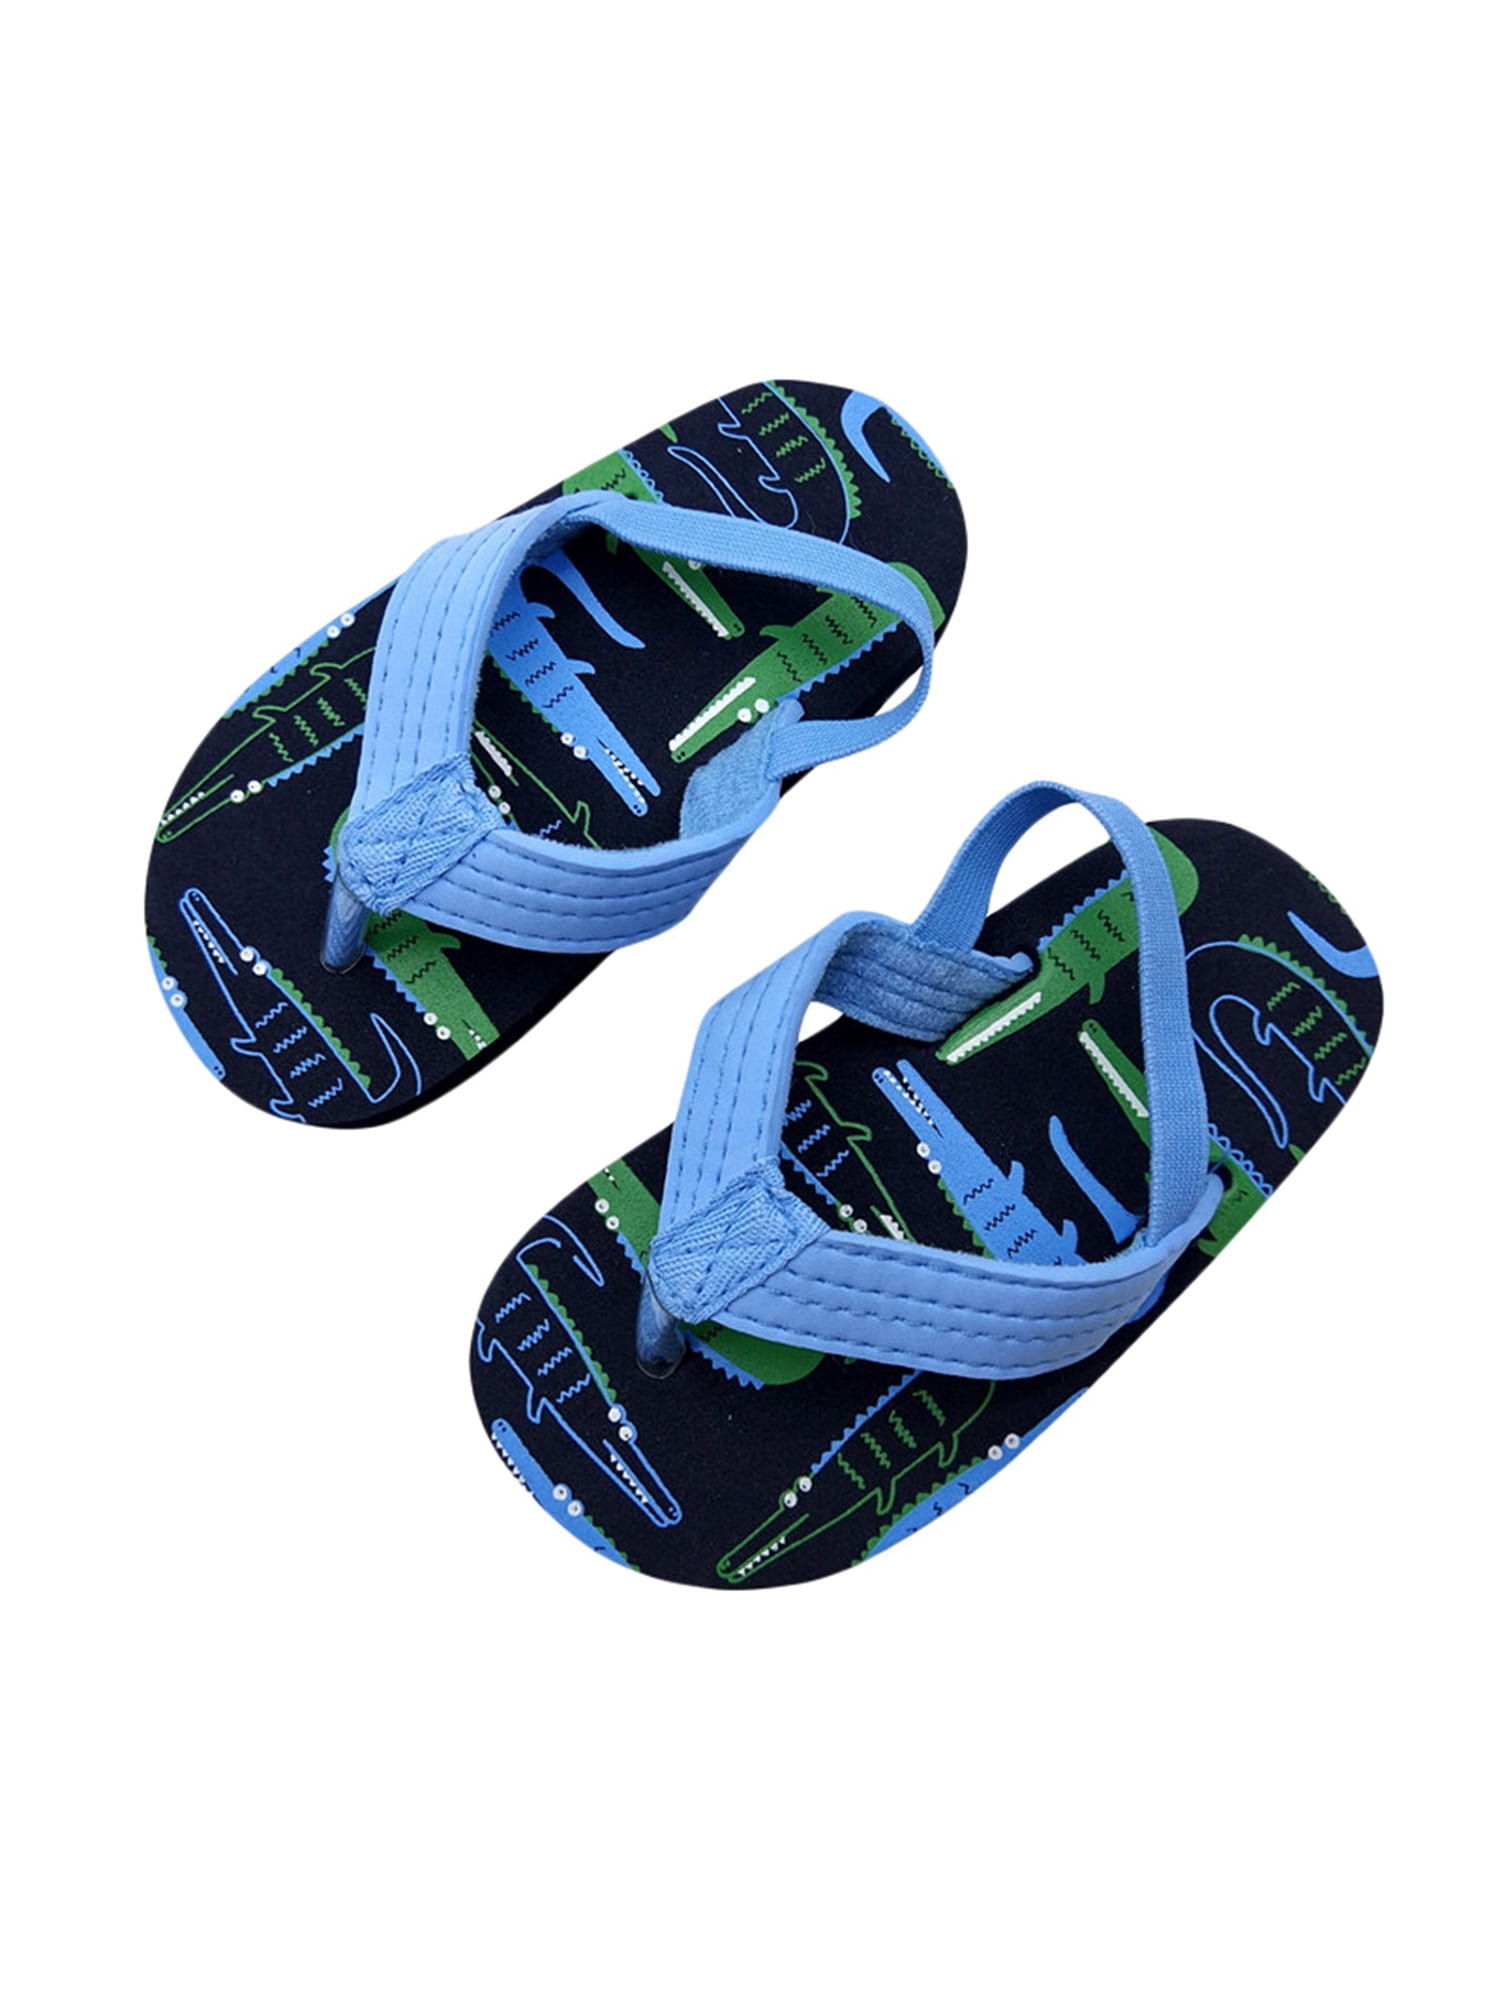 Amaping Kids Summer Sandals Slippers for Baby Girls Boys Beach Sandals Shoes Shower Pool Slippers 